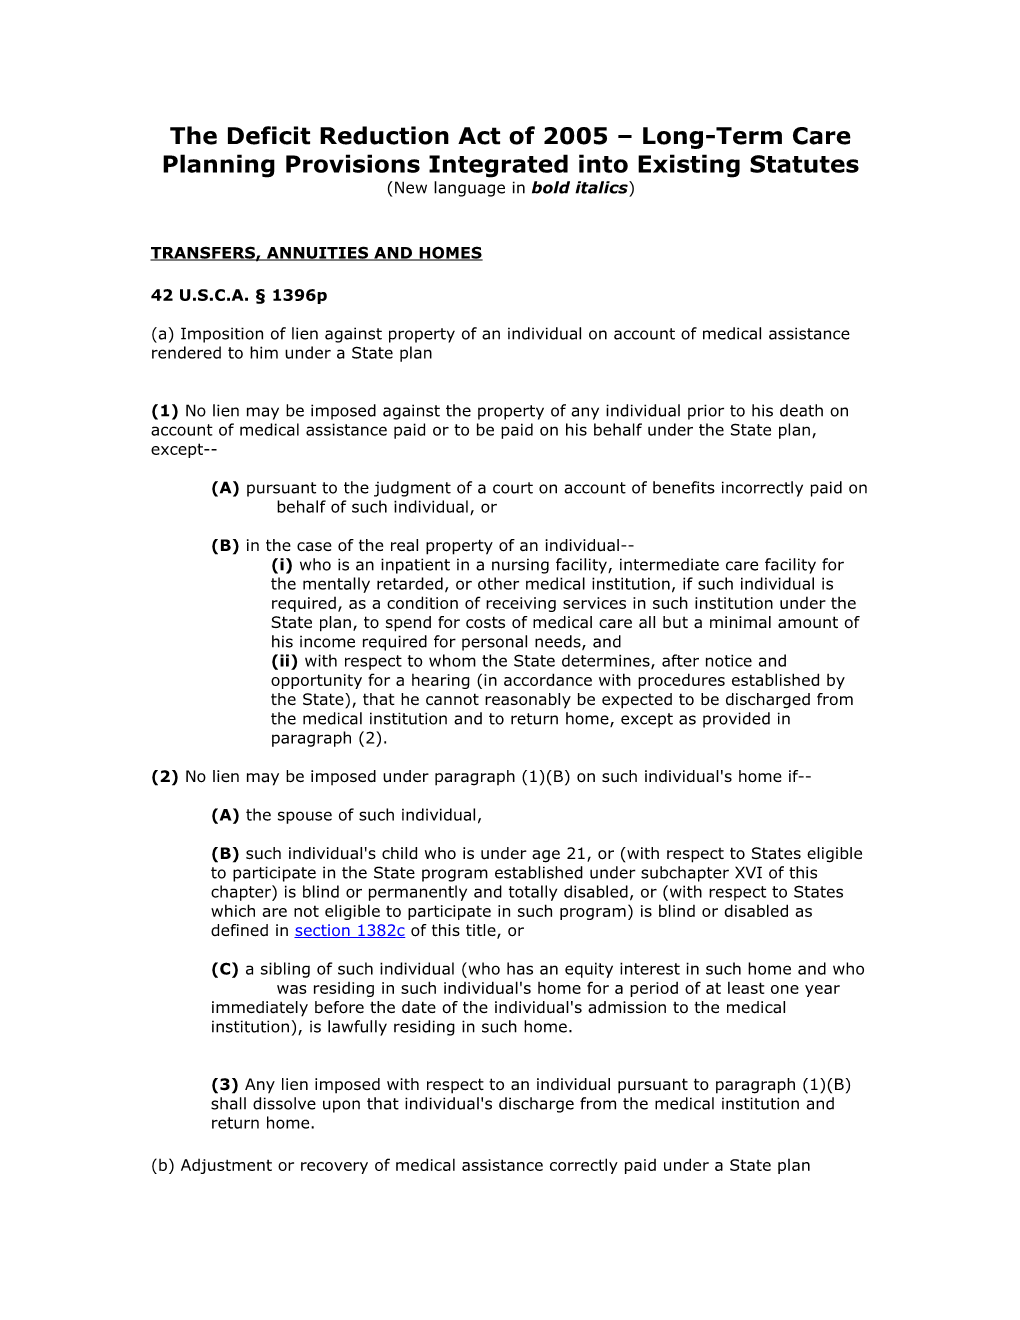 The Deficit Reduction Act of 2005 Long-Term Care Planning Provisions Integrated Into Existing